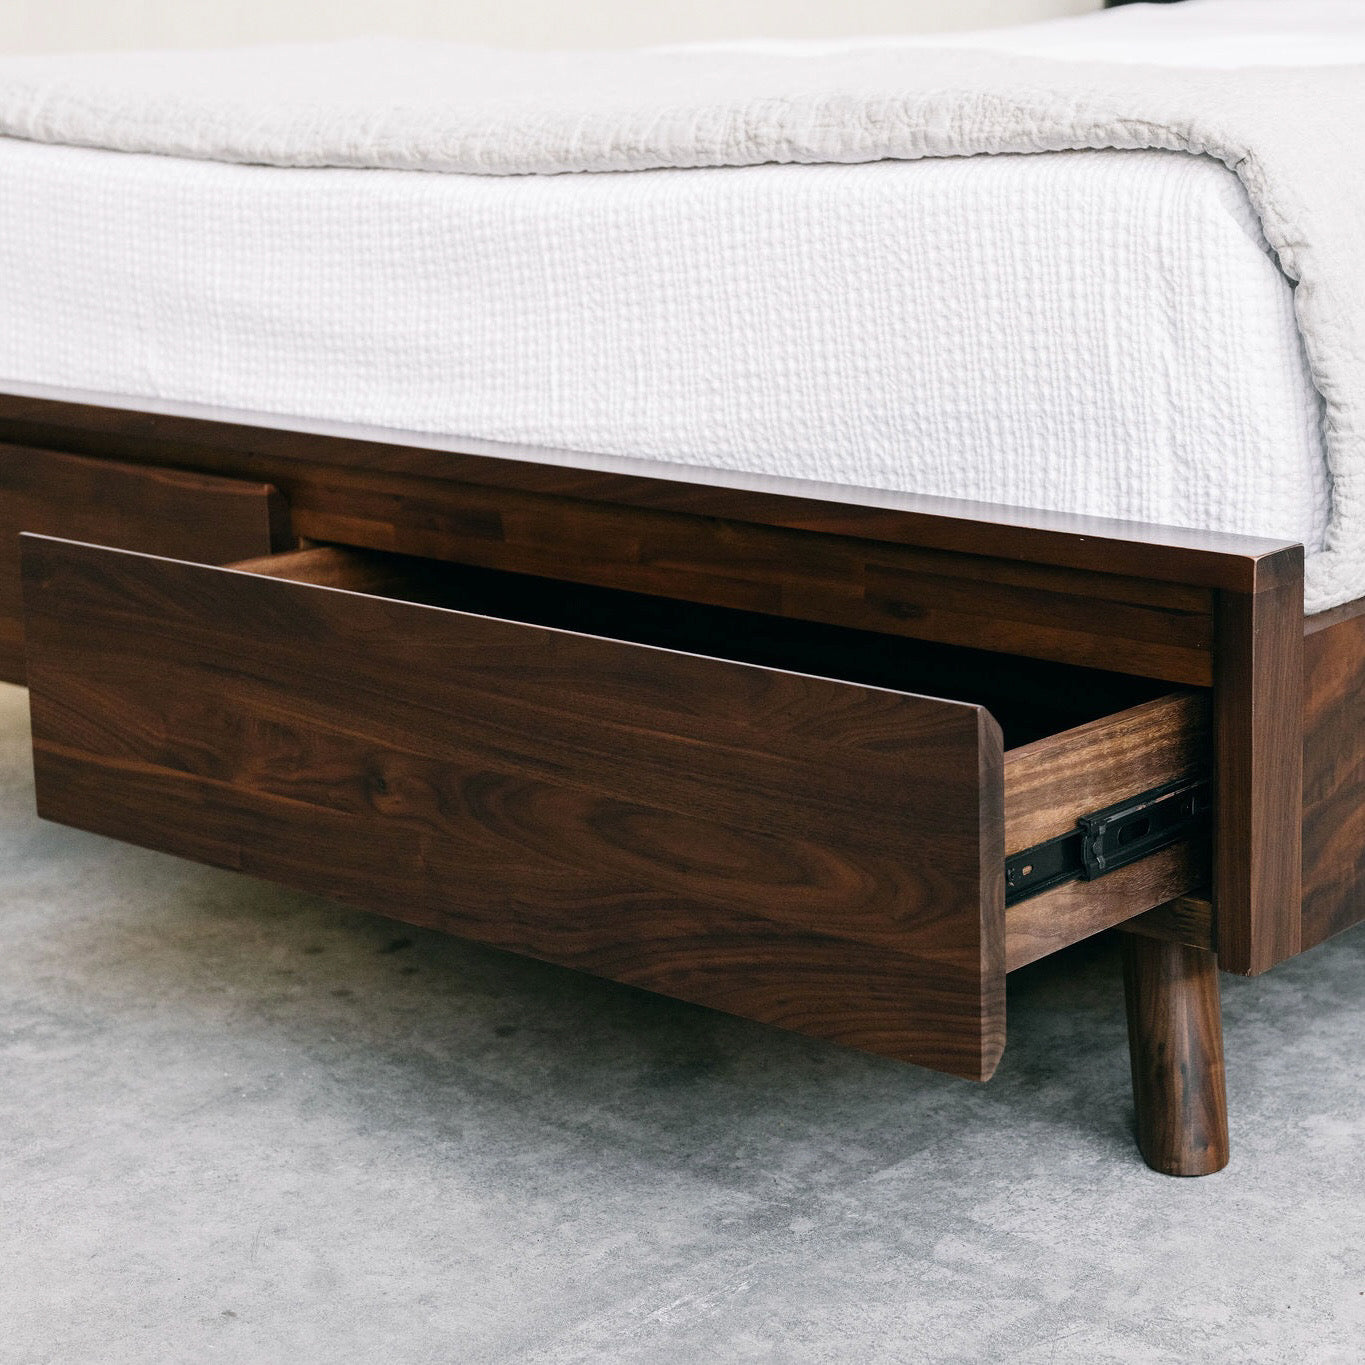 Mim Concept best Modern furniture stores in Toronto, Ottawa and Mississauga to sell modern contemporary bedroom furniture and condo furniture. Italian leather headboard bed Low profile platform storage bed solid walnut wood organic modern